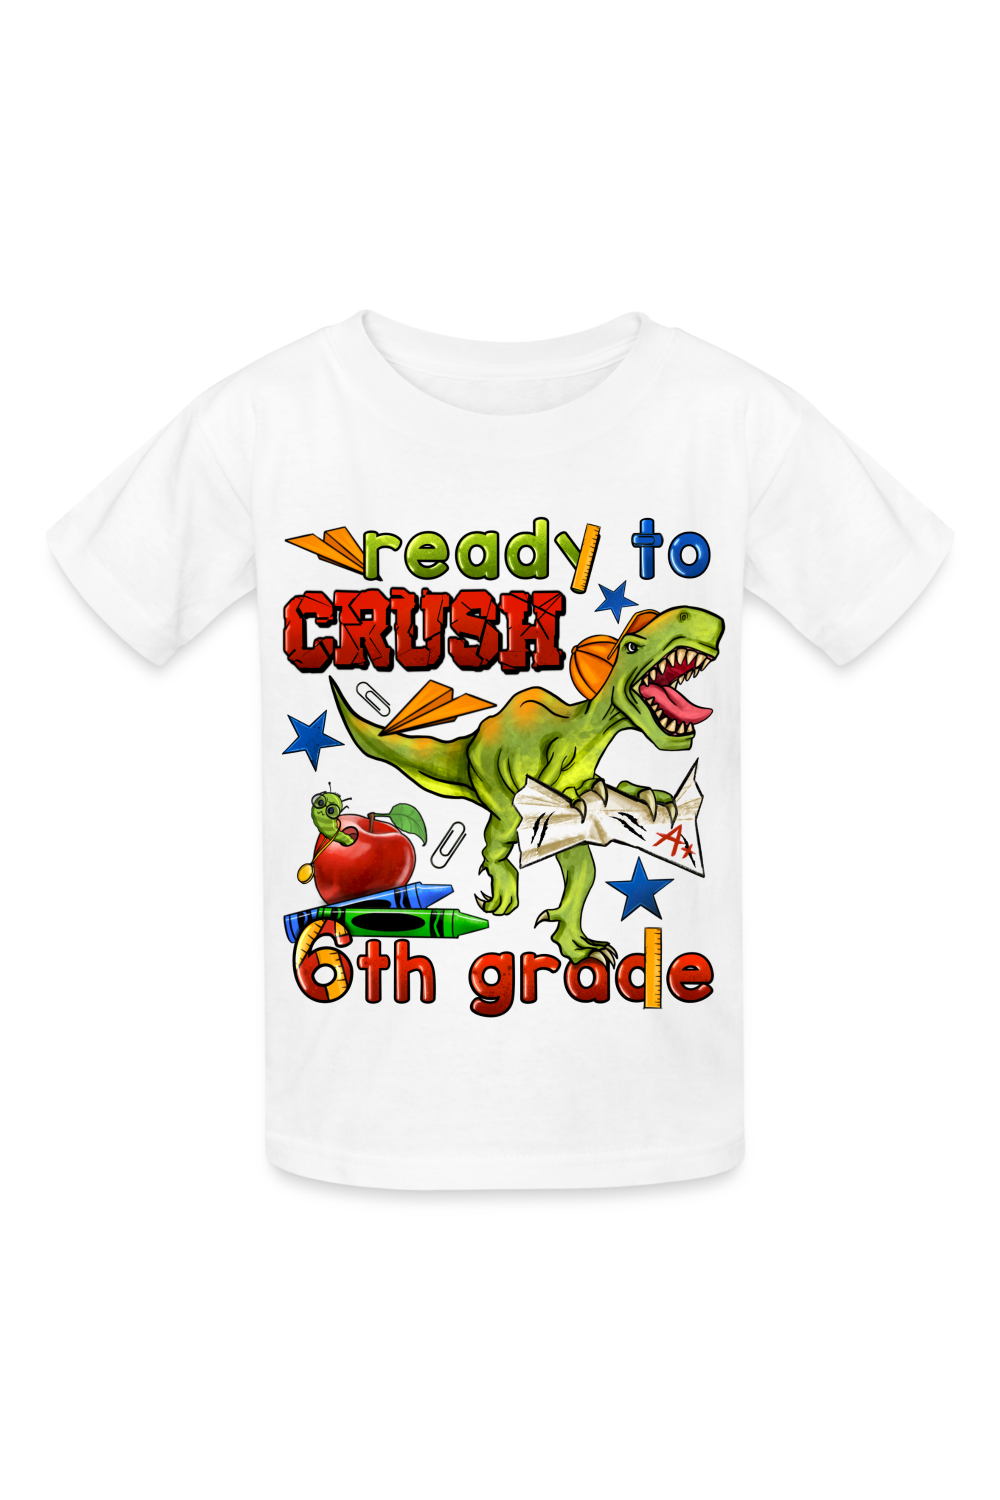 Boys Ready To Crush Six Grade Short Sleeve Tee Shirts for Back To School - white - NicholesGifts.online